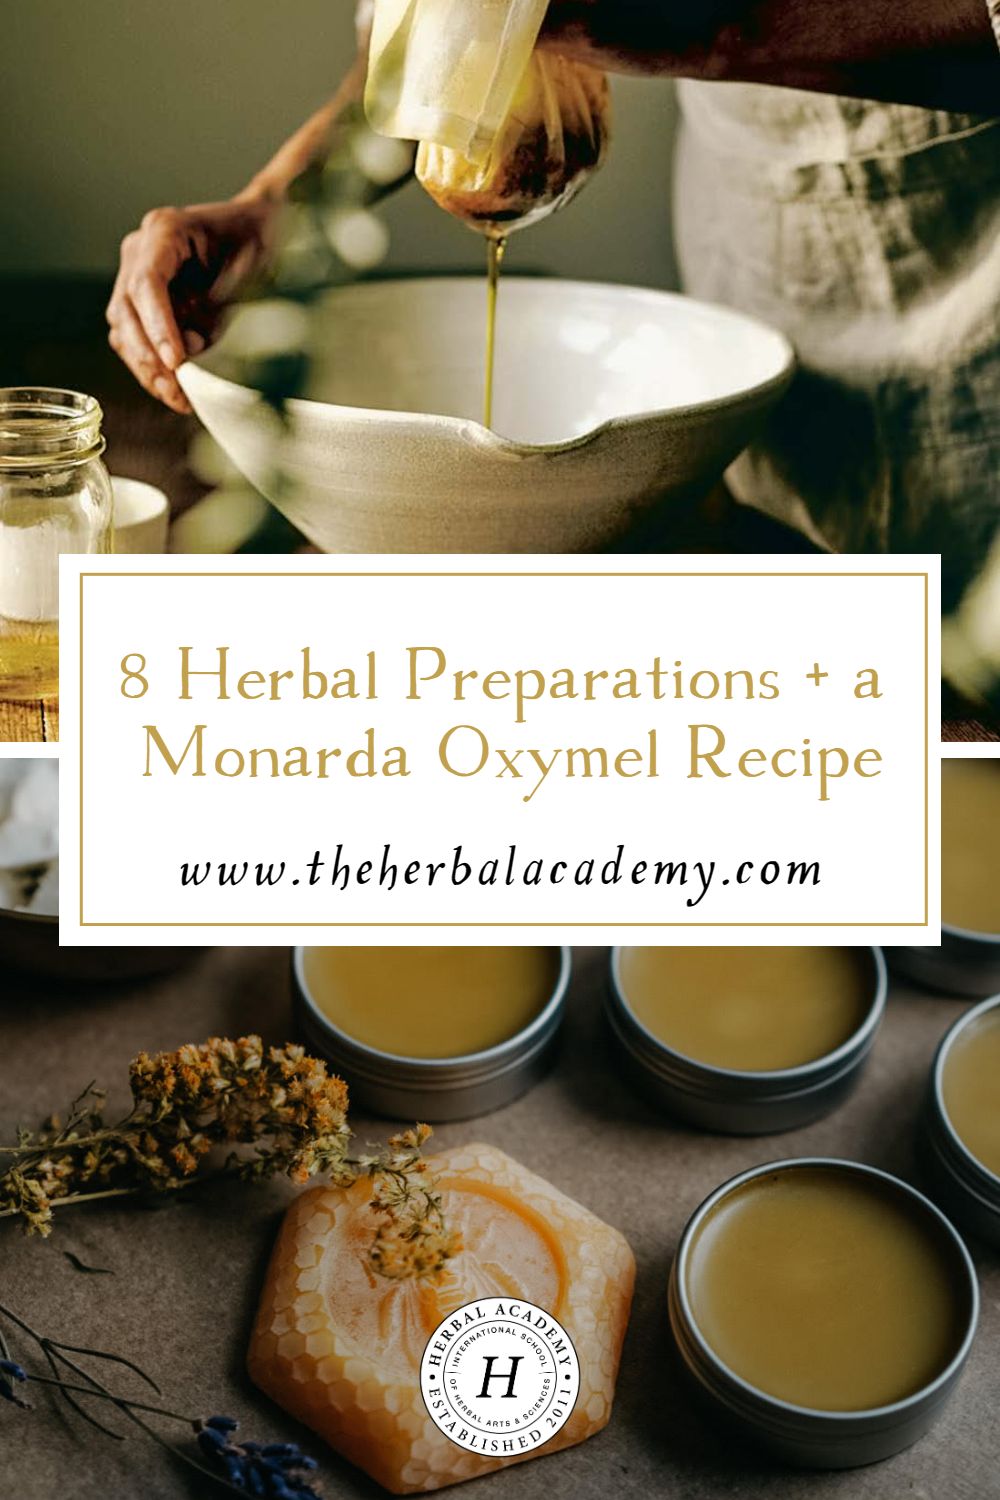 8 Herbal Preparations + a Monarda Oxymel Recipe | Herbal Academy | This book excerpt is taken from Alyson Morgan's book, Our Kindred Home, and outlines 8 herbal preparations plus a Monarda Oxymel Recipe!